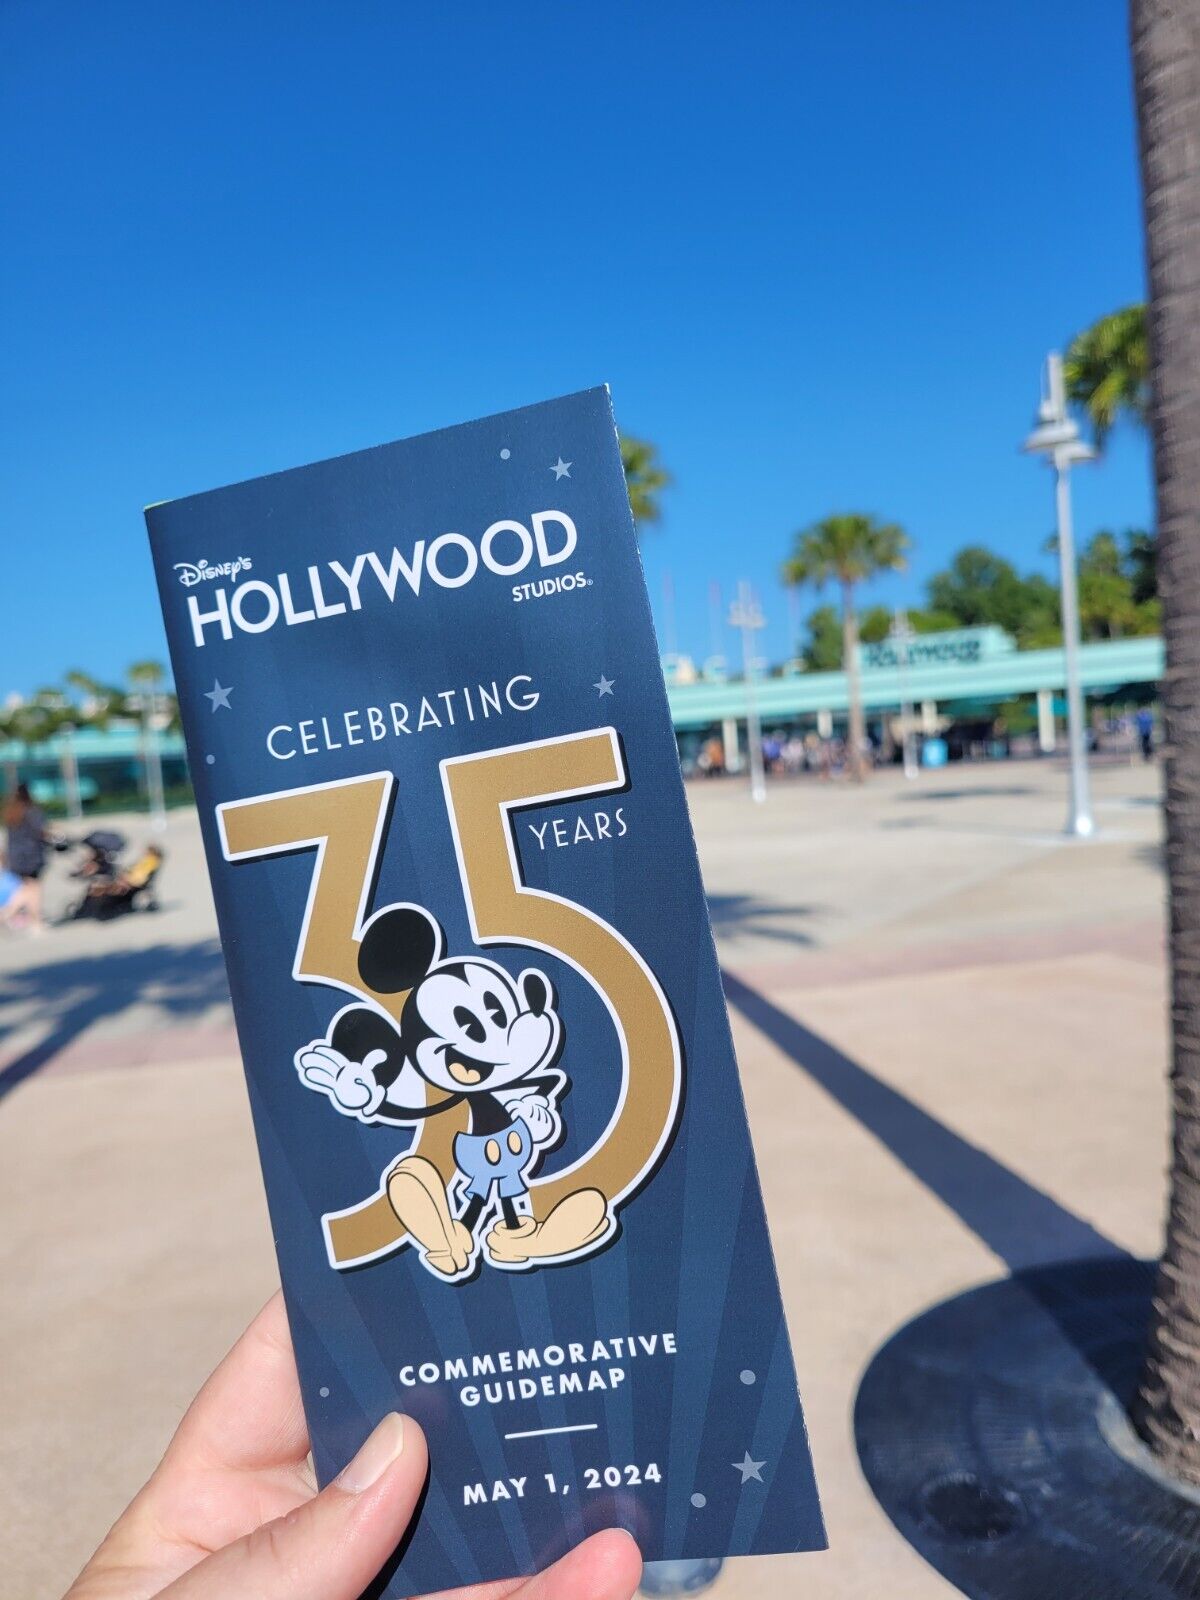 Disney Hollywood Studios 35th Anniversary Dated Commemorative Map Poster 5/1/24